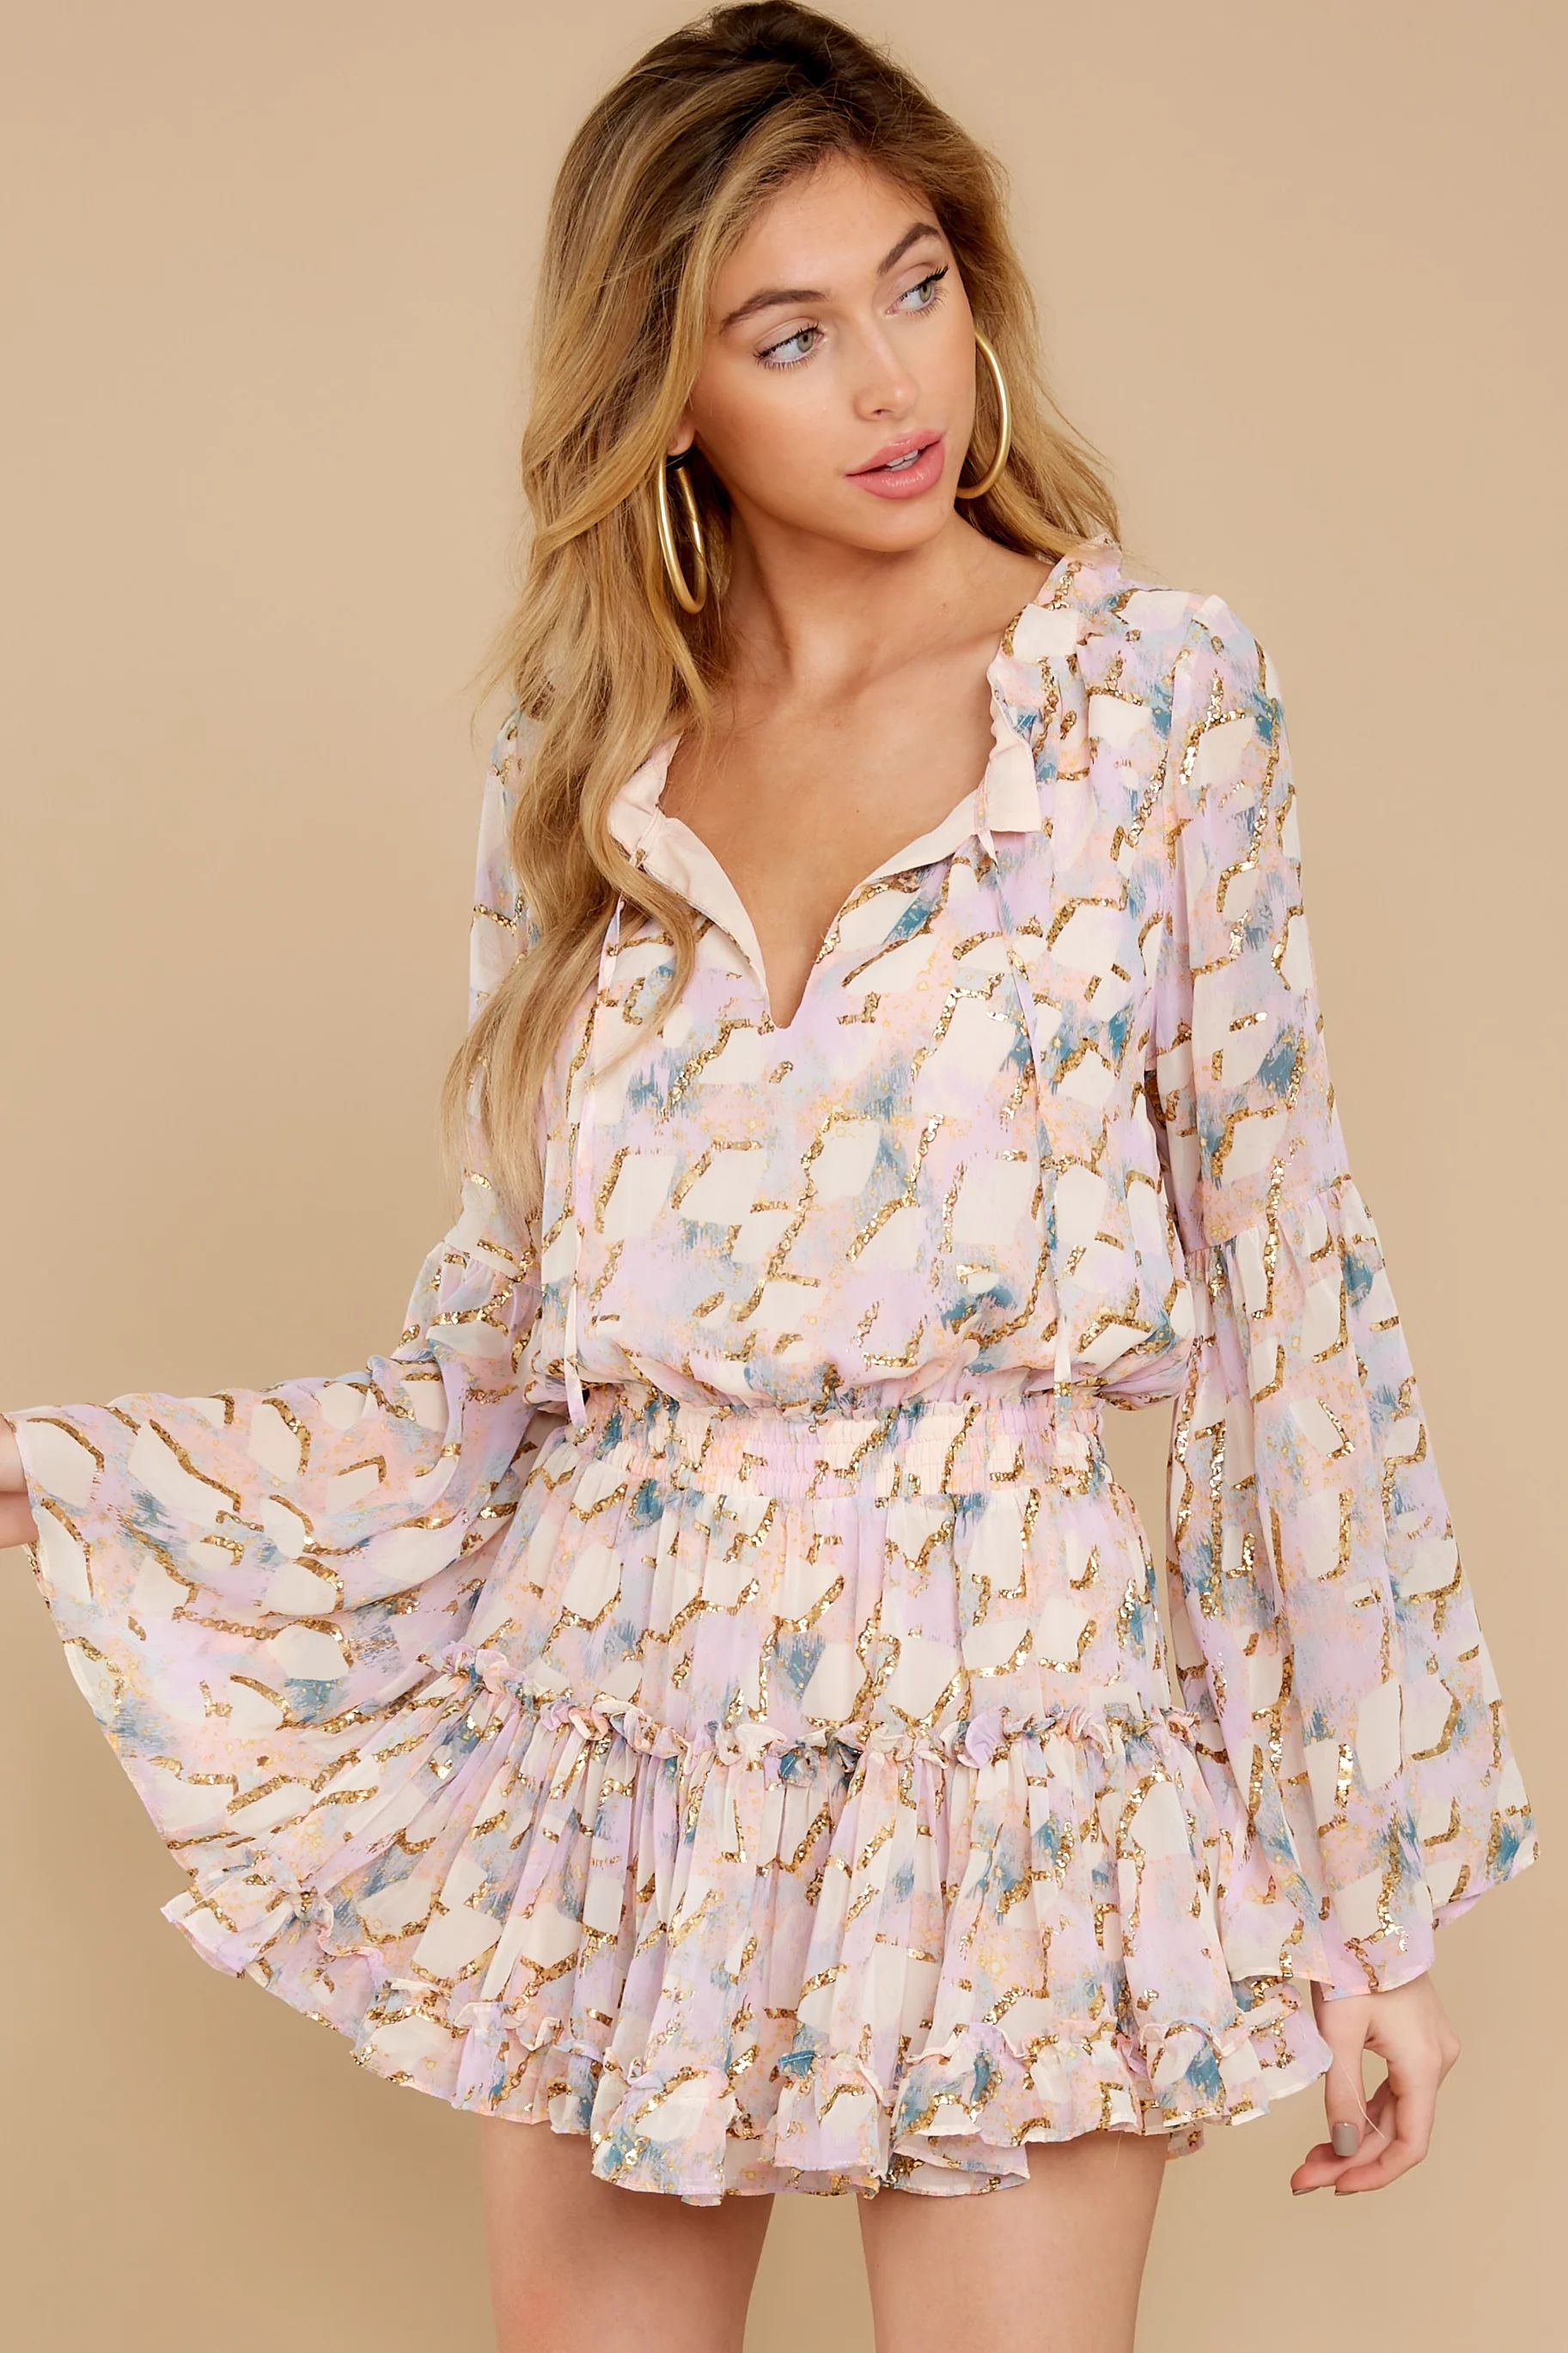 Always Say Yes Light Pink Multi Print Dress | Red Dress 